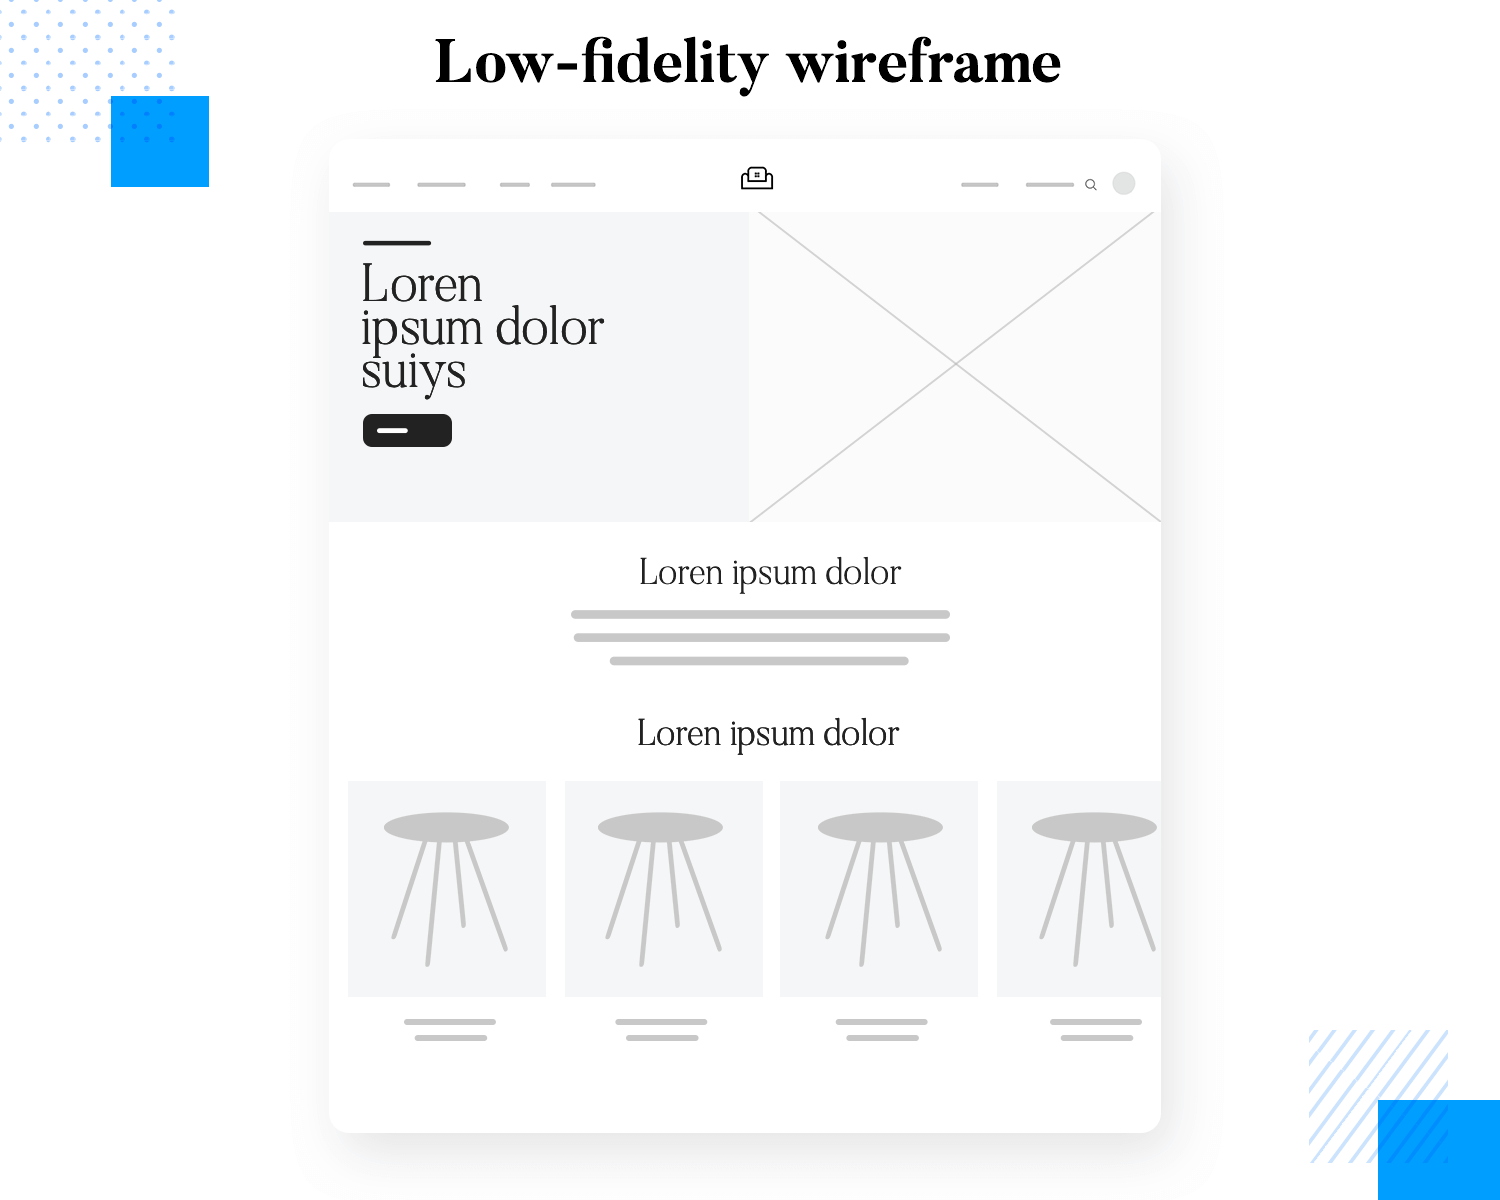 Low fidelity wireframes consist of outlines